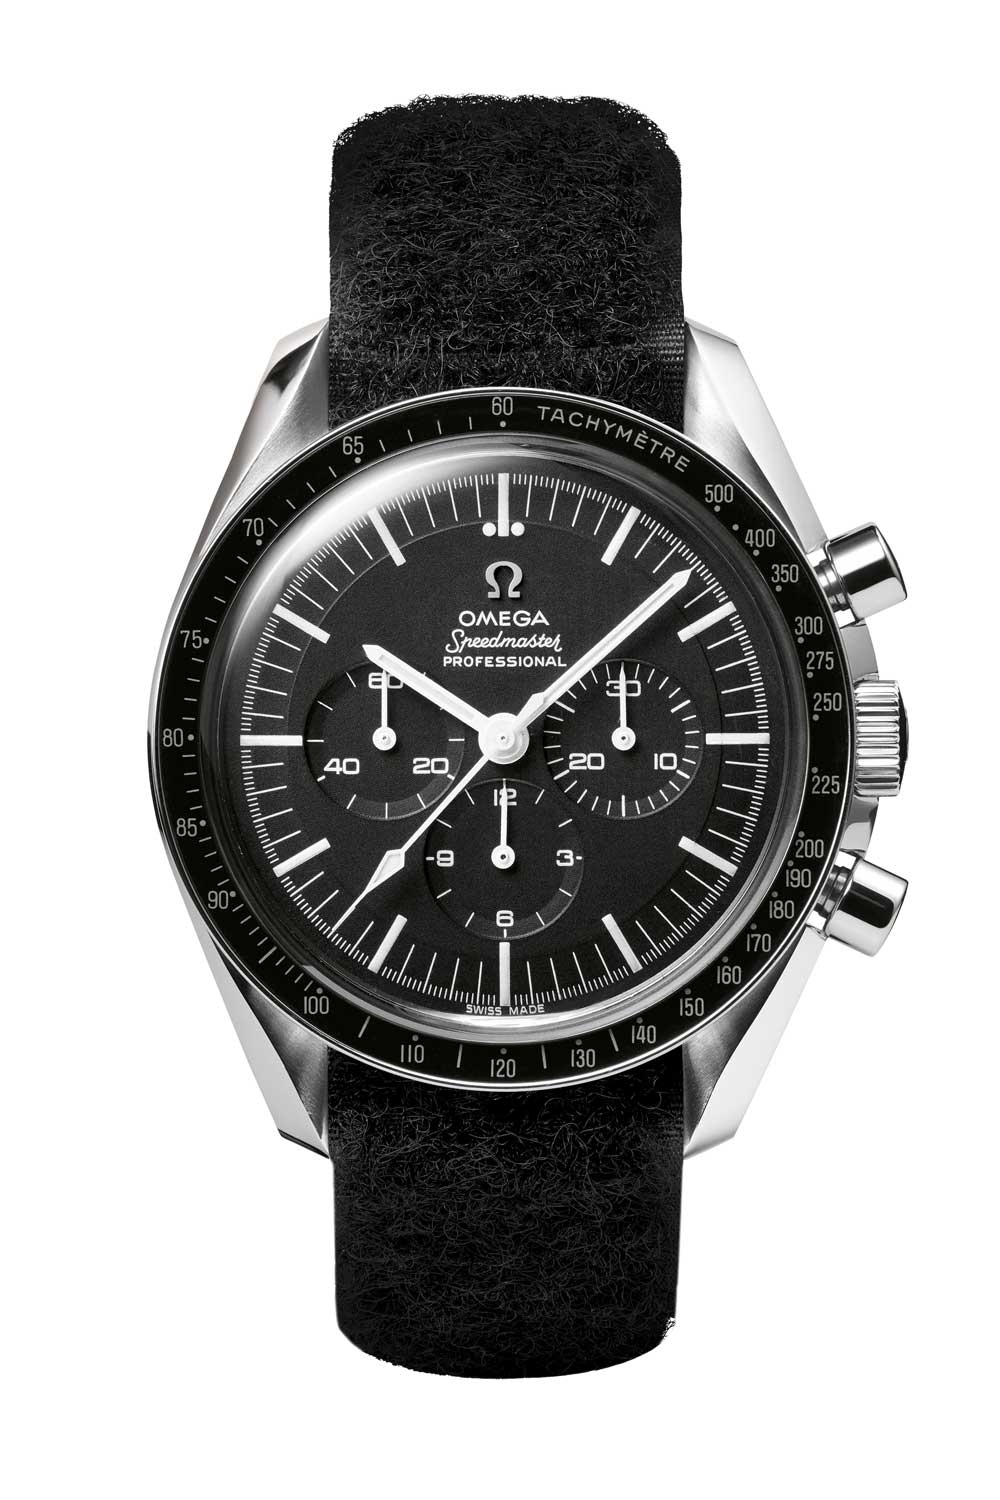 The first “Moonwatch,” worn by the astronauts of Appollo 11